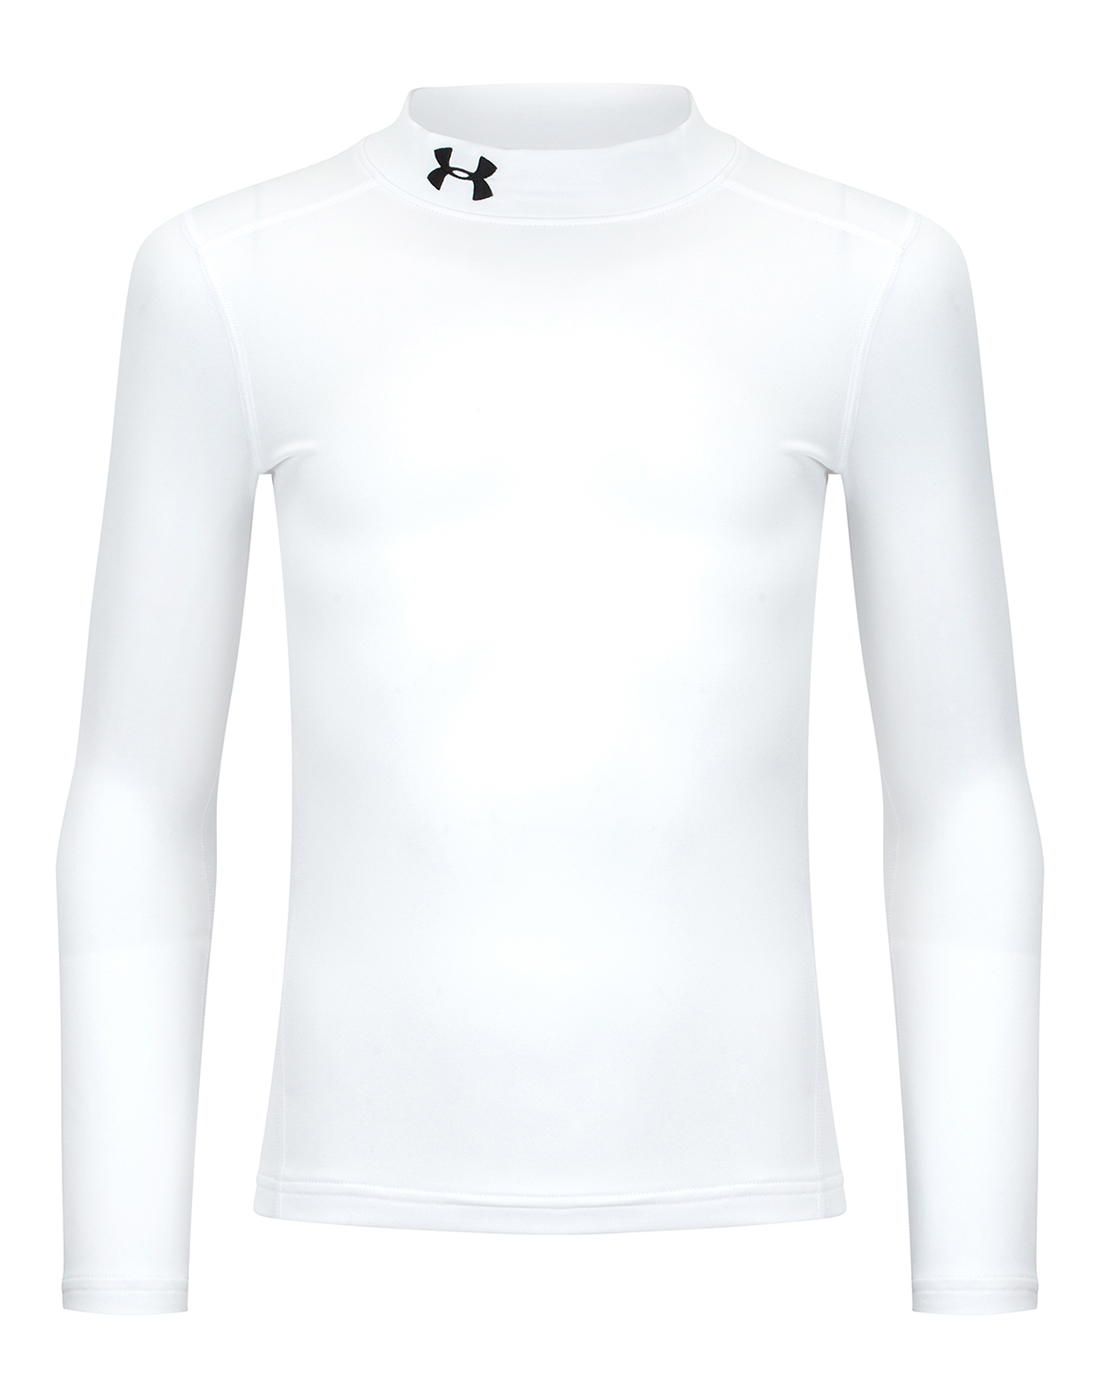 under armour cold gear t shirt